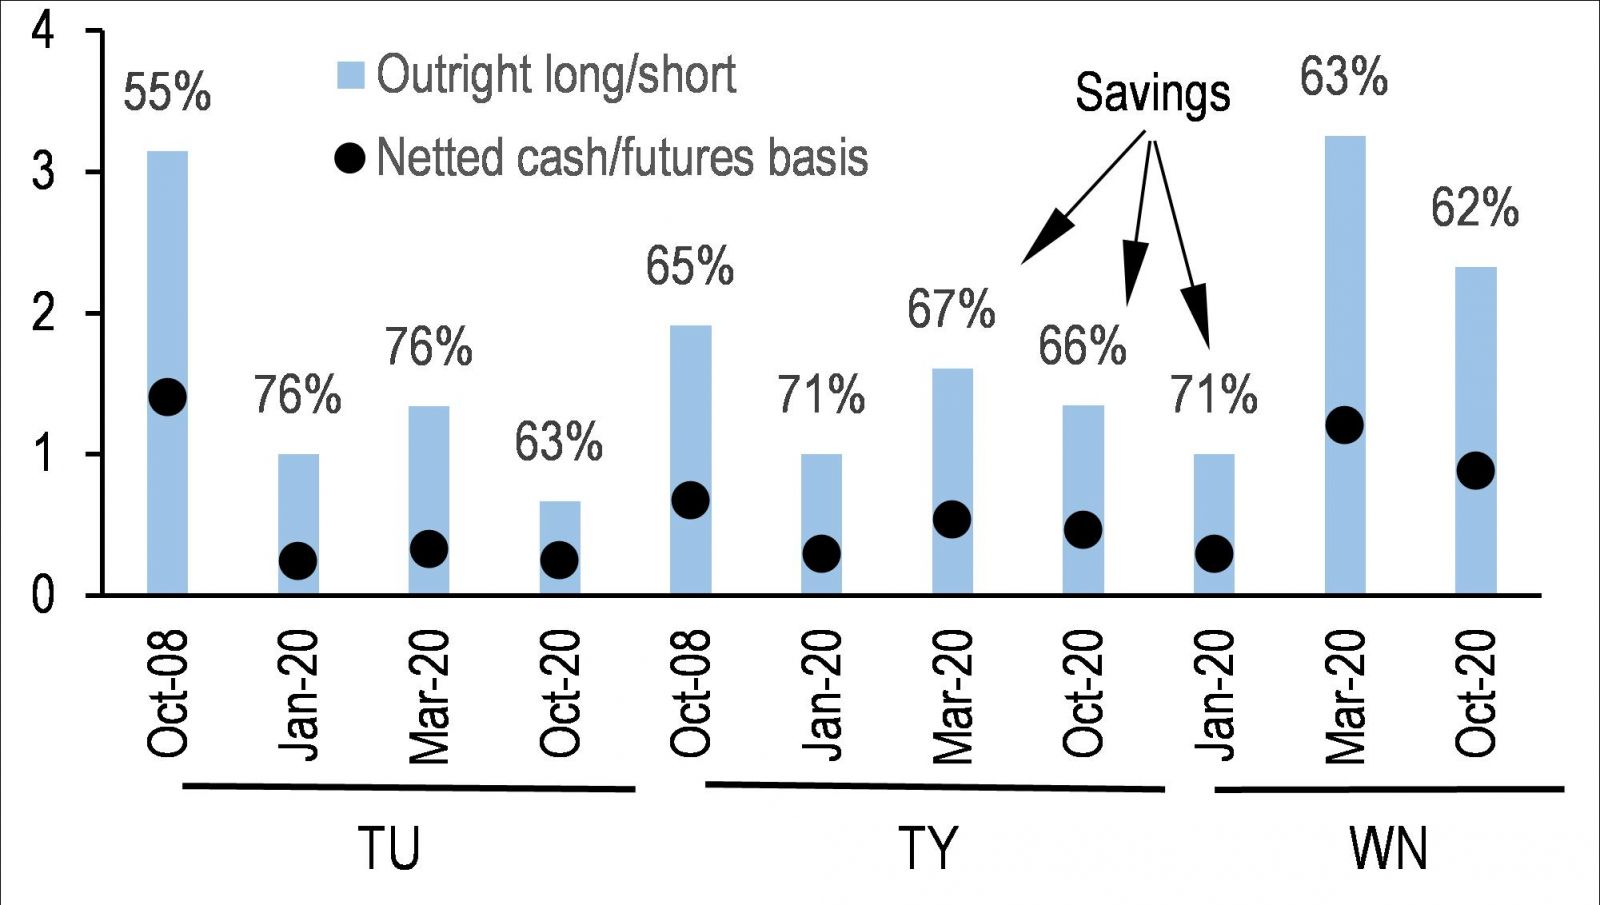 Exhibit 6: Allowing cross-margining of cash/futures basis positions would significantly reduce IM requirements and could allow for more stable and conservative minimums IM requirements of outright and netted CTD cash/futures basis positions by evaluation date, both normalized to 1.0 for outright positions as of January 2020, with savings indicated above; unitless